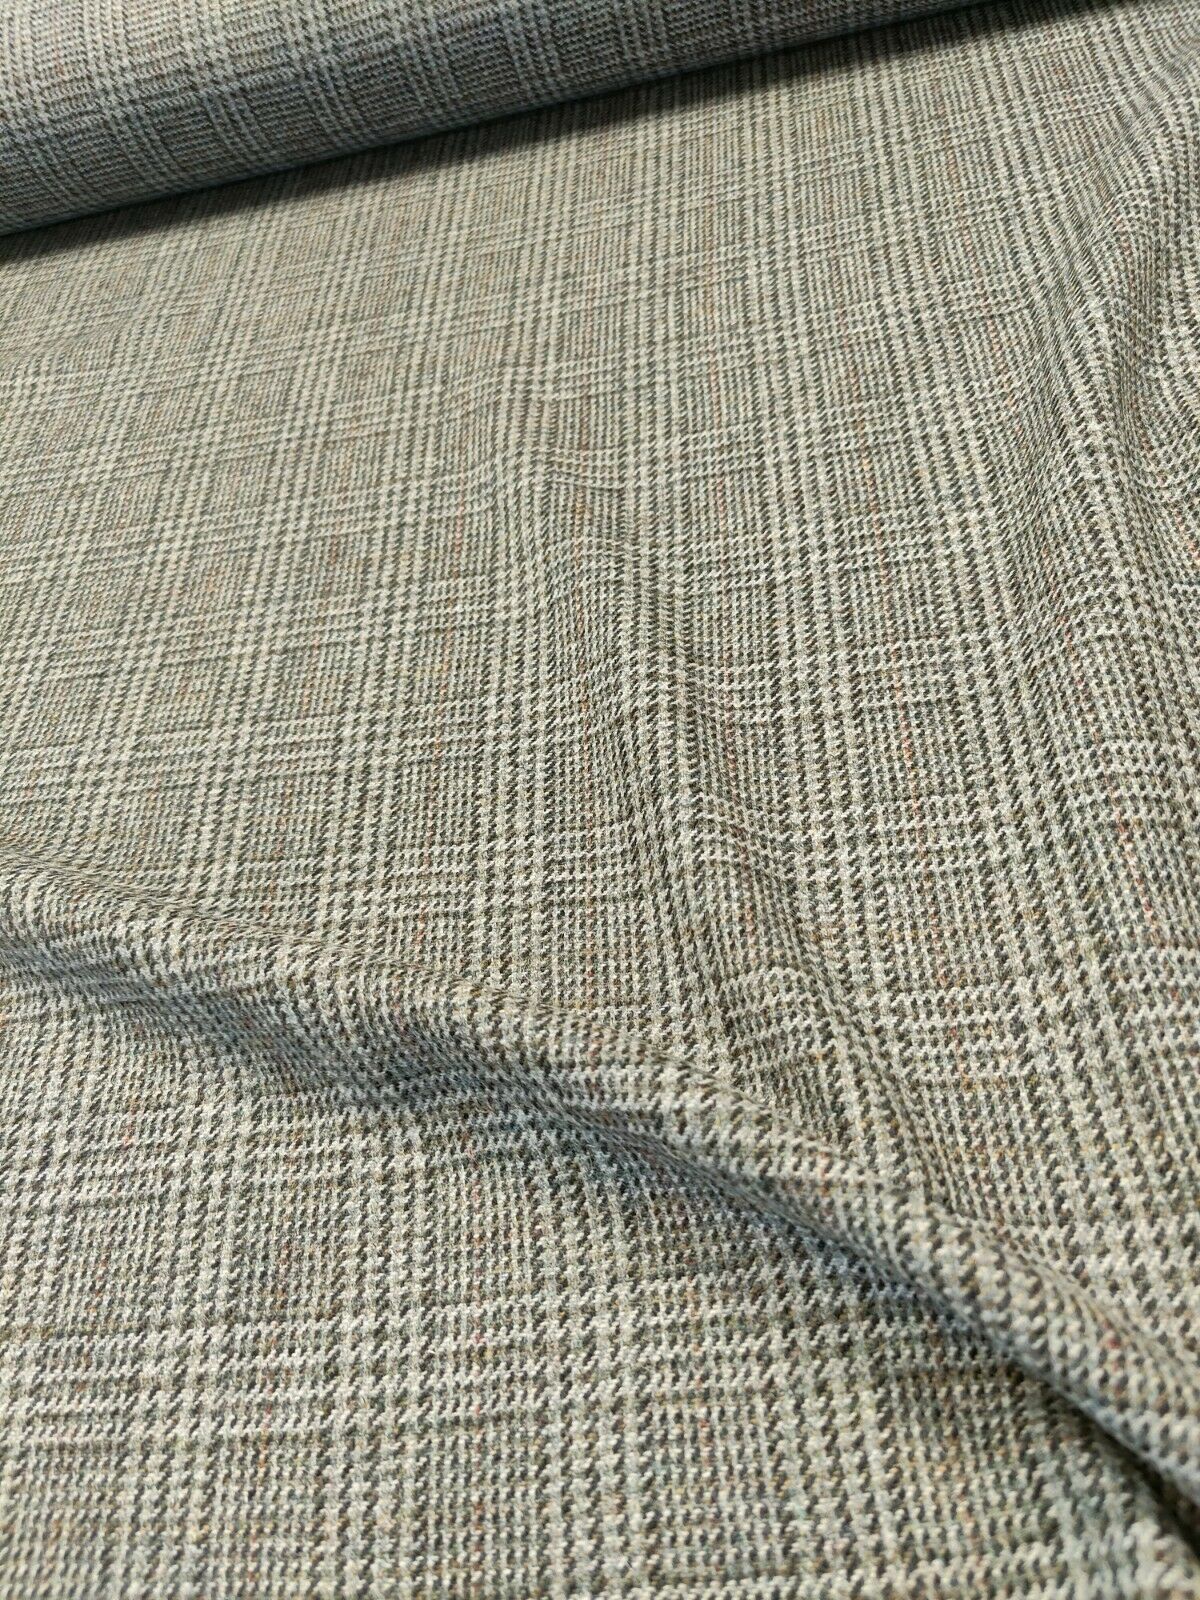 Art Of The Loom 100% Wool Check/Plaid Spotted Upholstery Fabrics